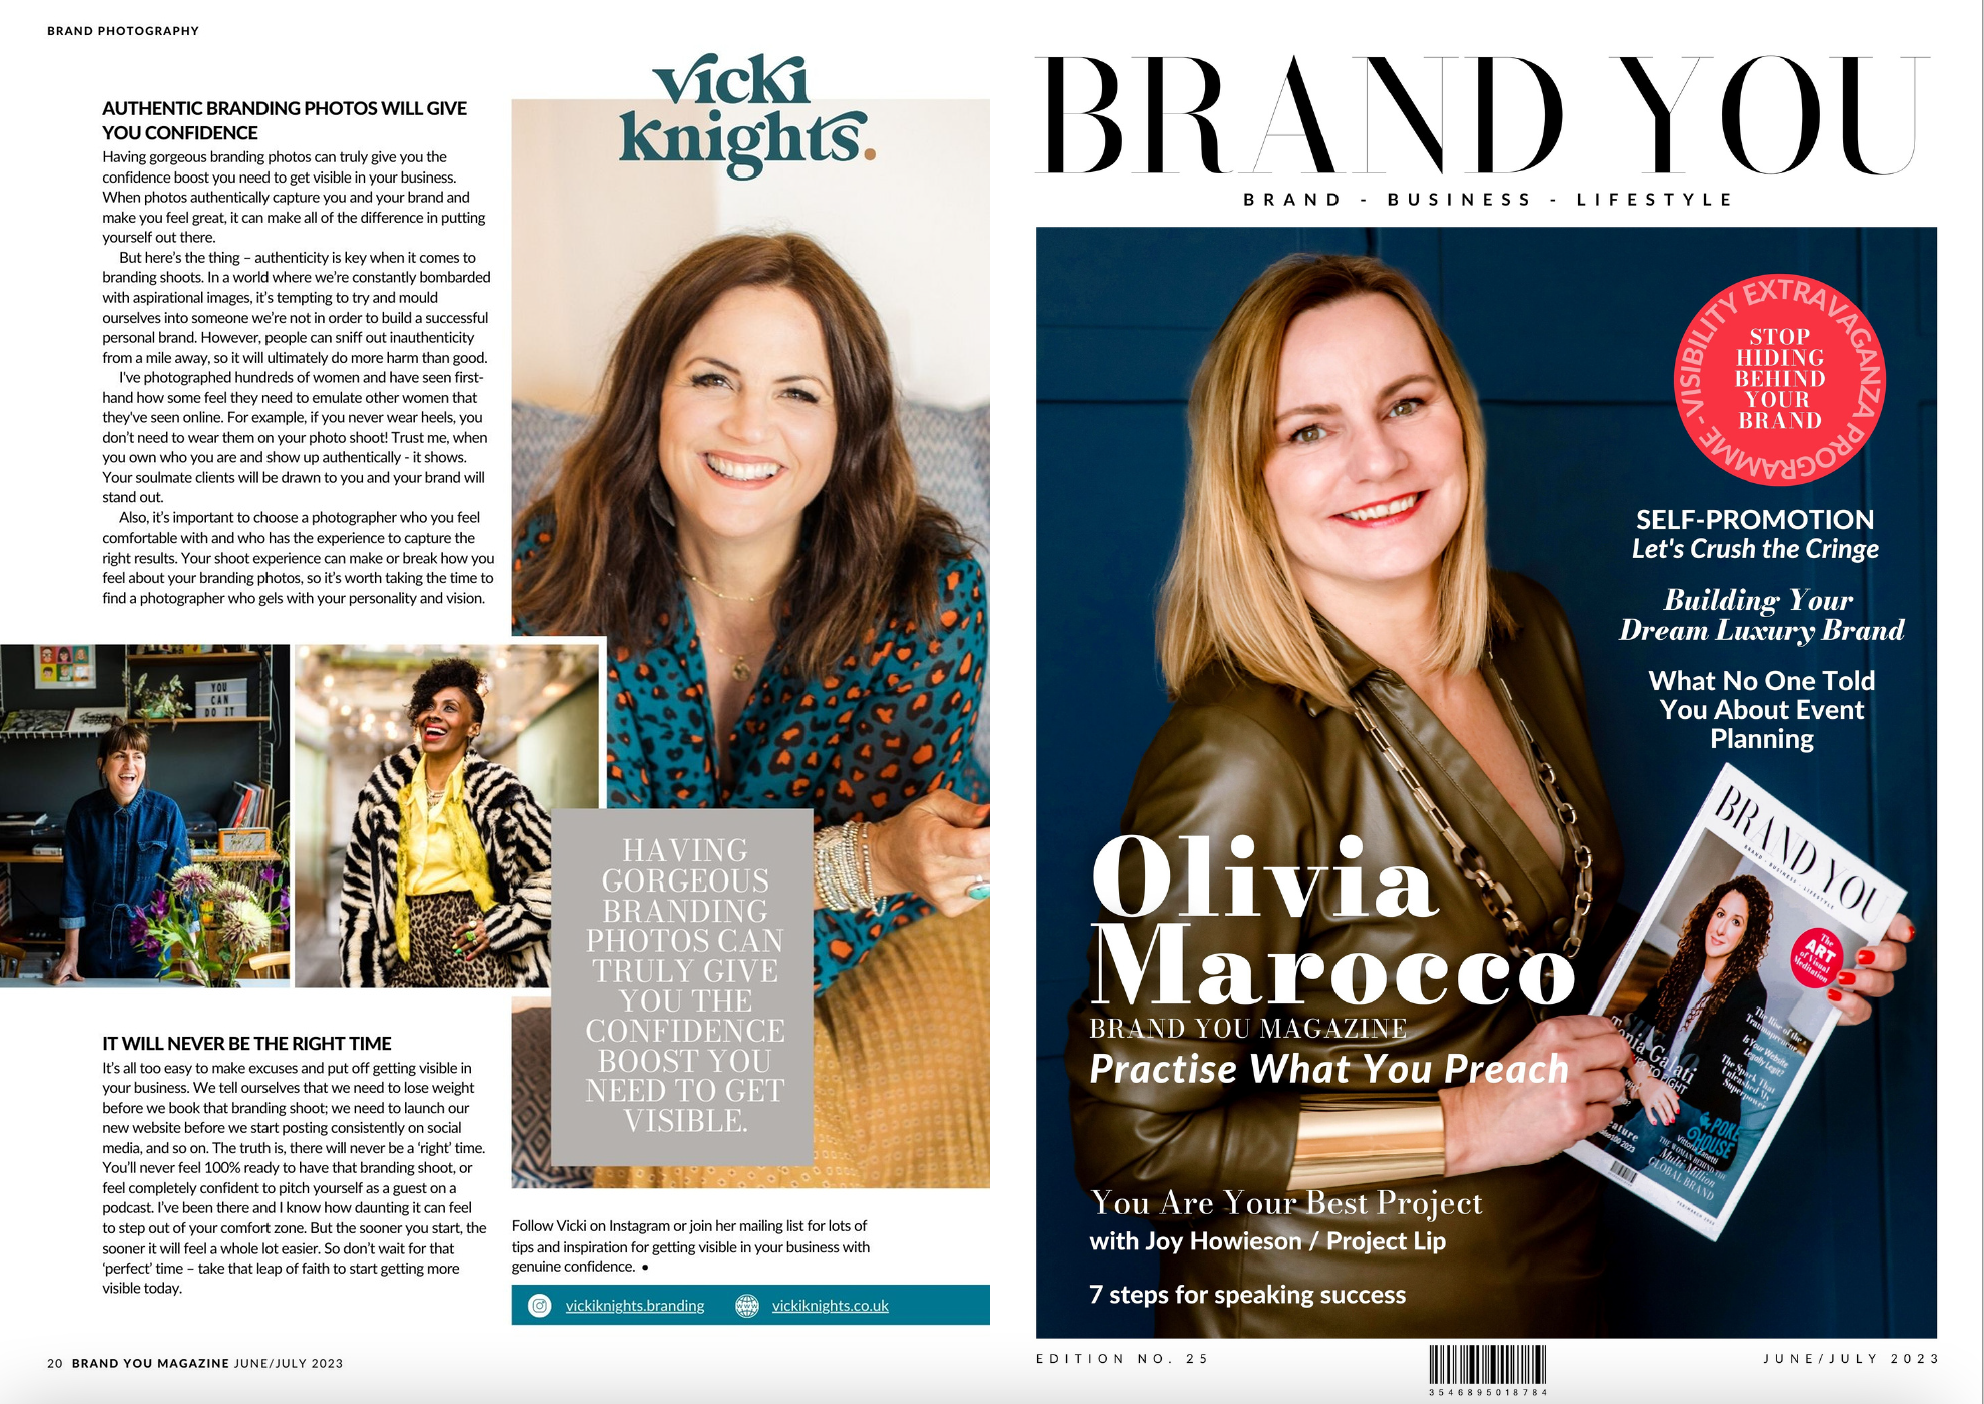 Brand you magazine feature